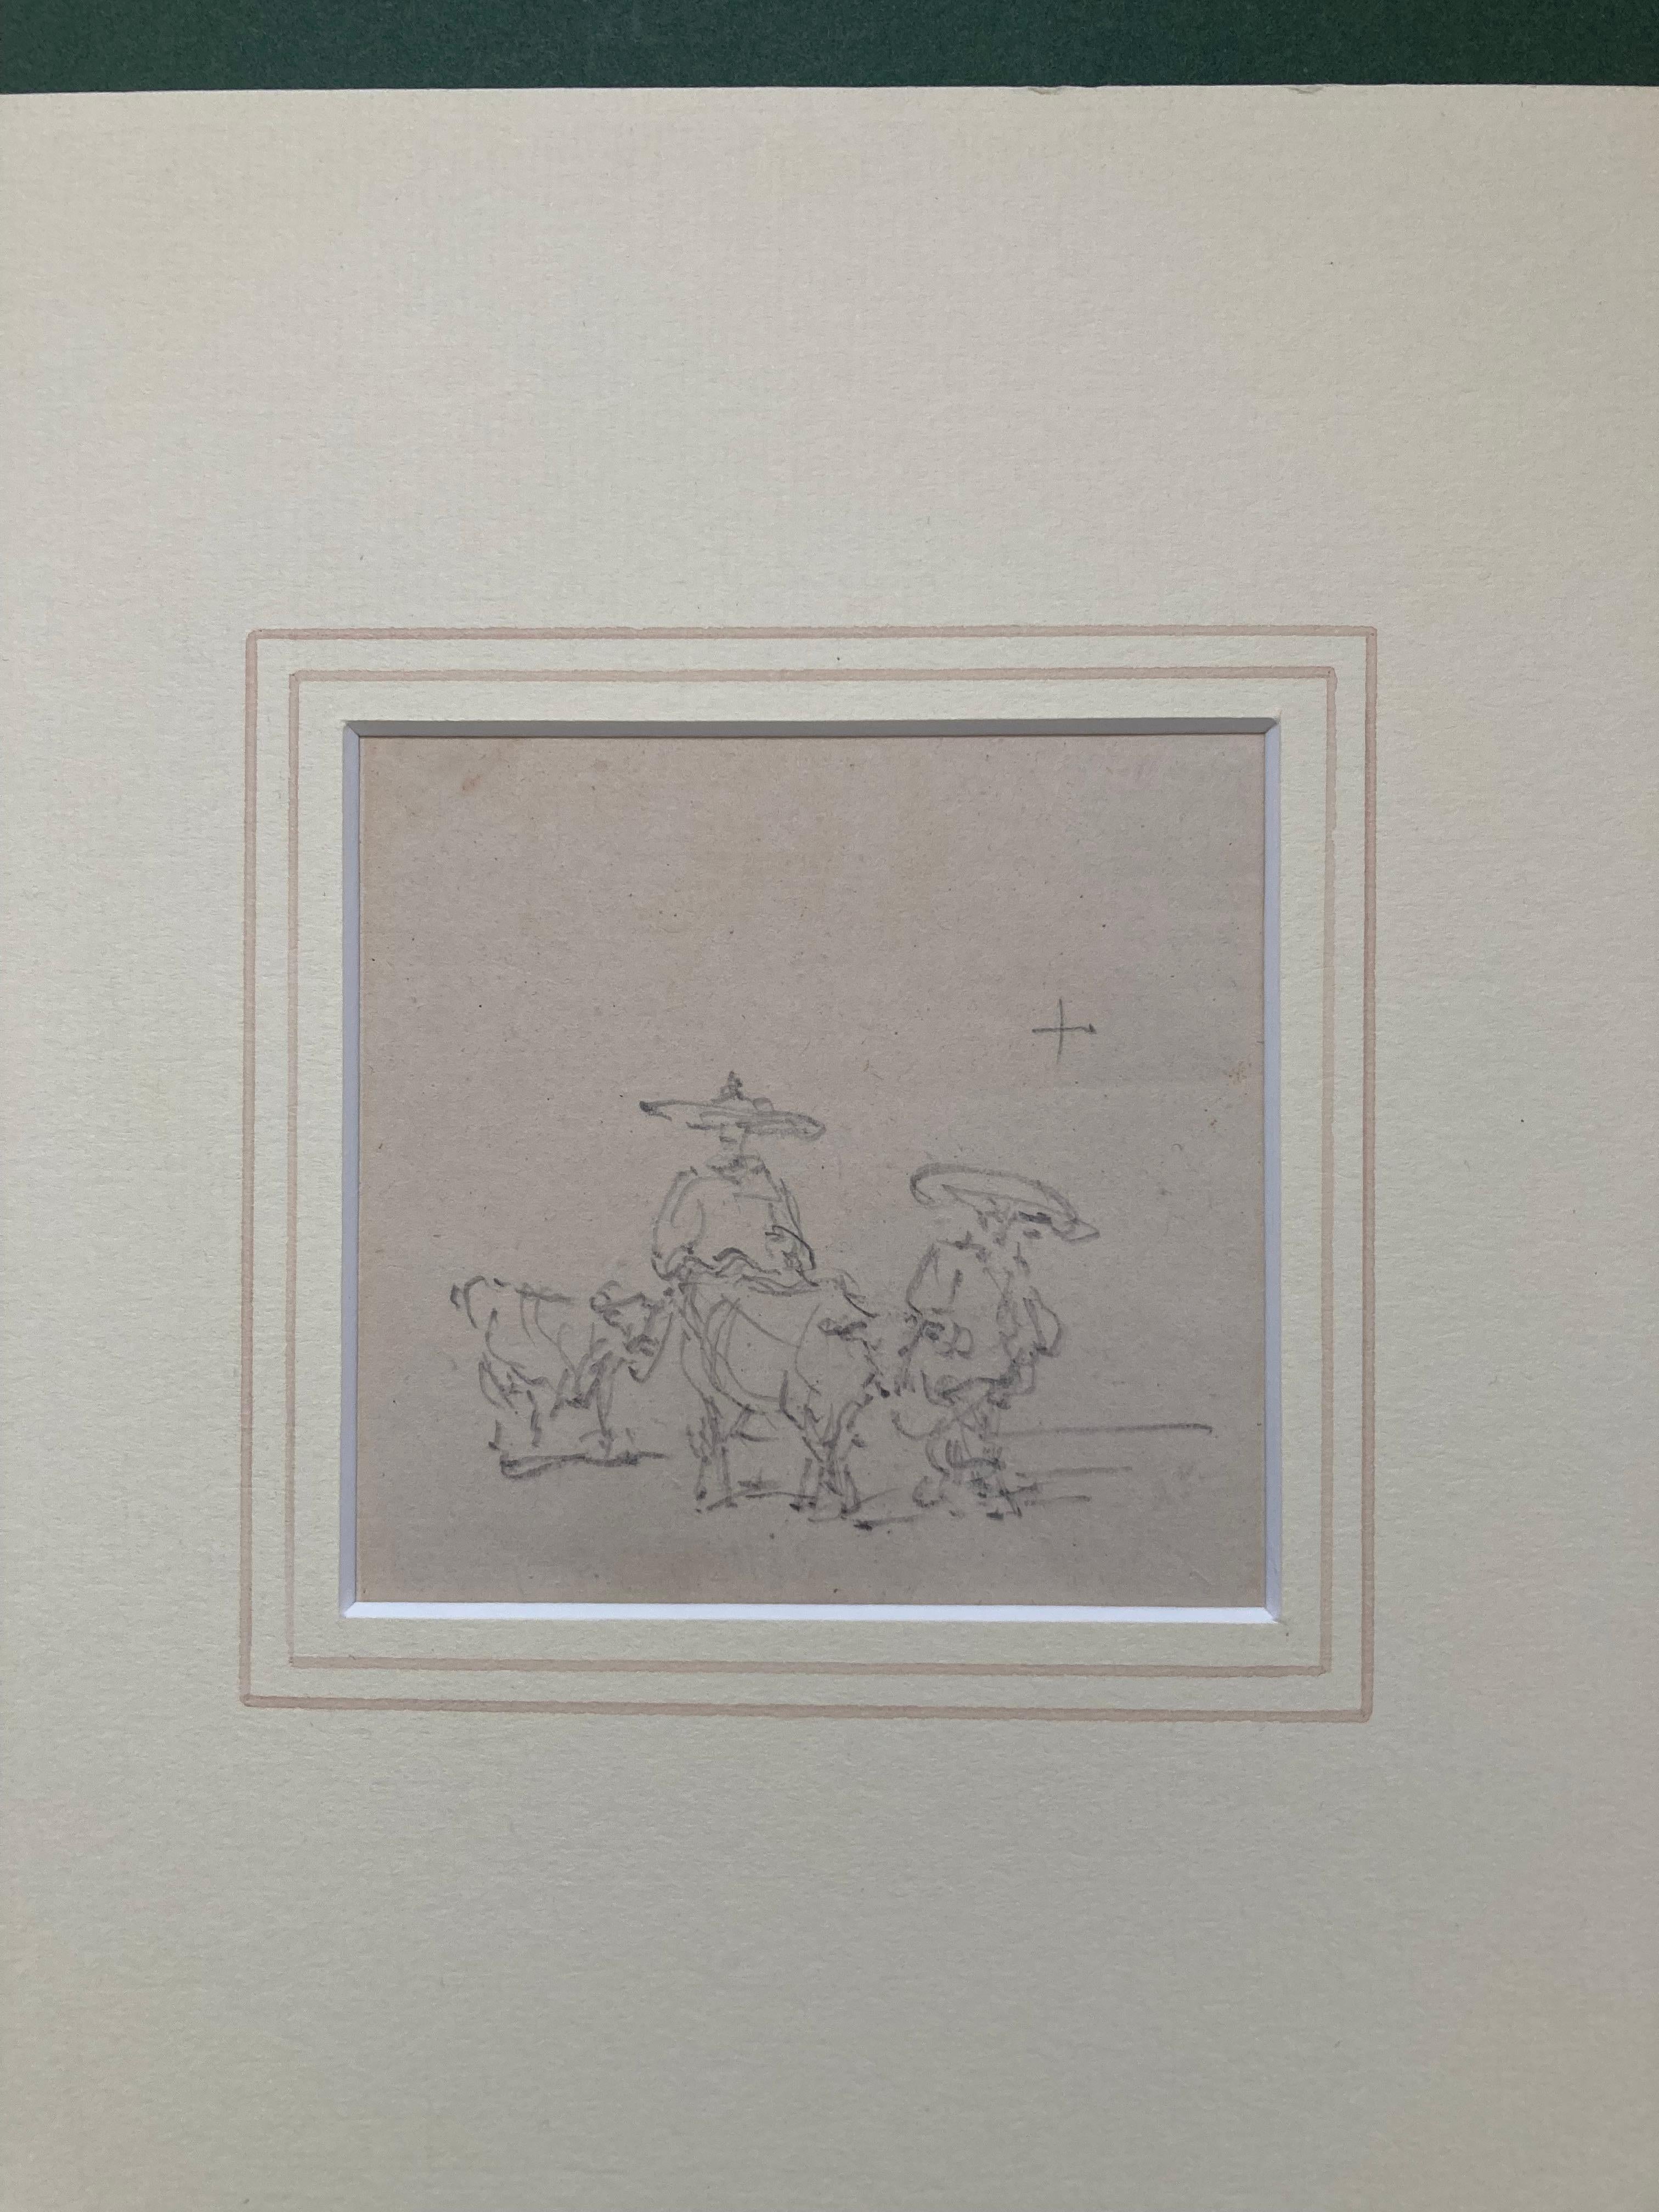 A beautifully drawn pencil study of Chinese figures by one of the great topographical masters of the early 19th Century.

George Chinnery (1774-1852)
Chinese figures leading livestock
Inscribed with artist's shorthand upper right
Pencil on paper
3 x